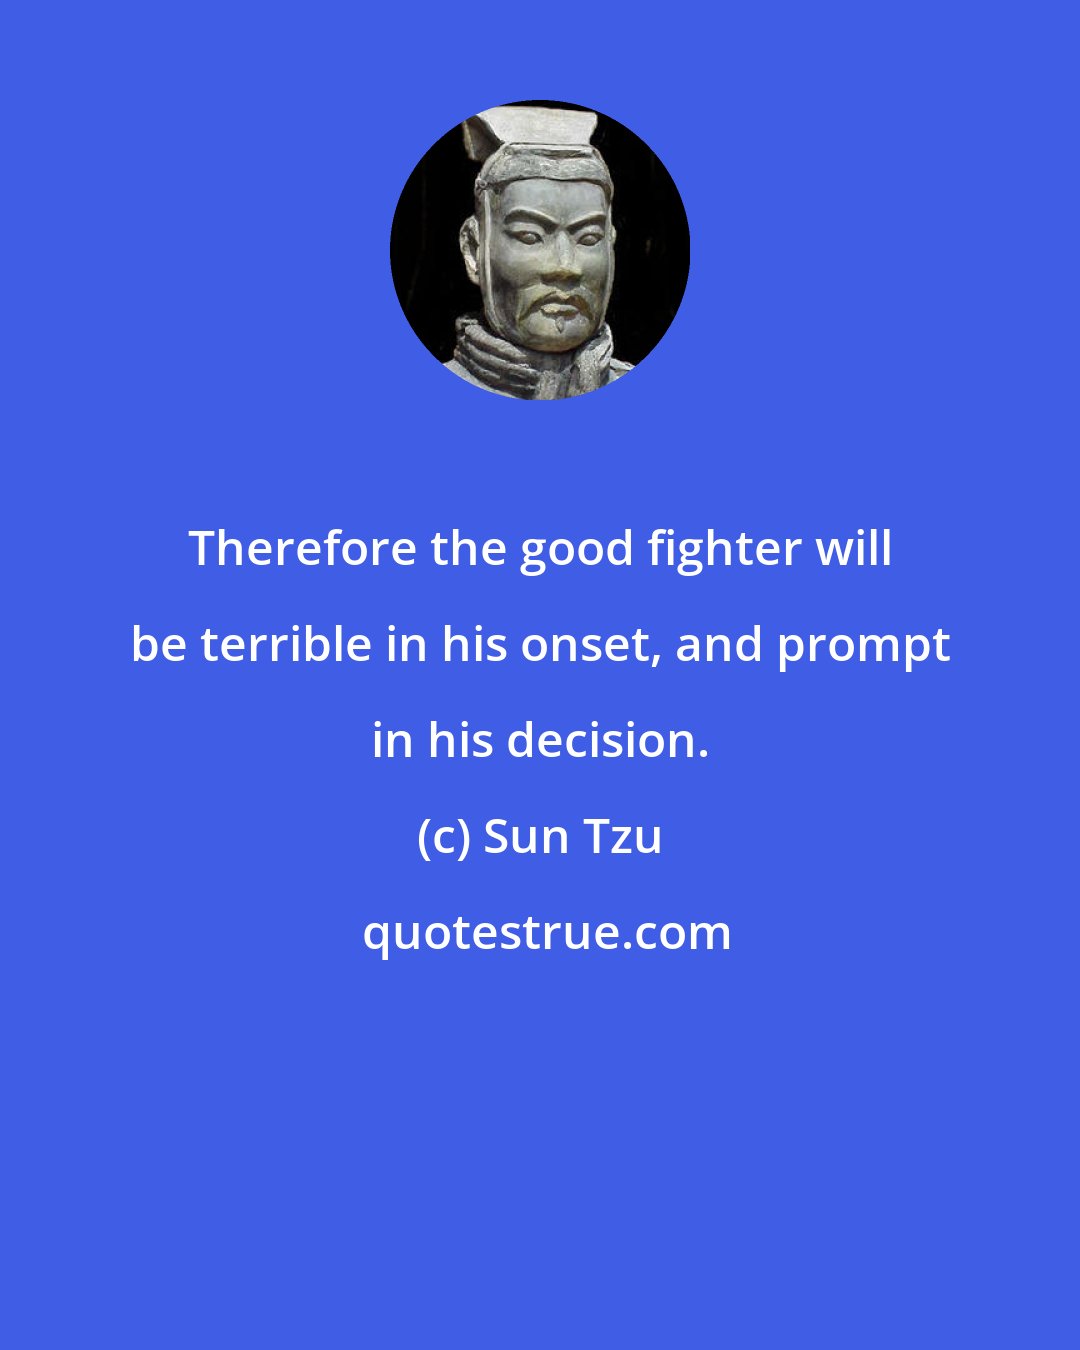 Sun Tzu: Therefore the good fighter will be terrible in his onset, and prompt in his decision.